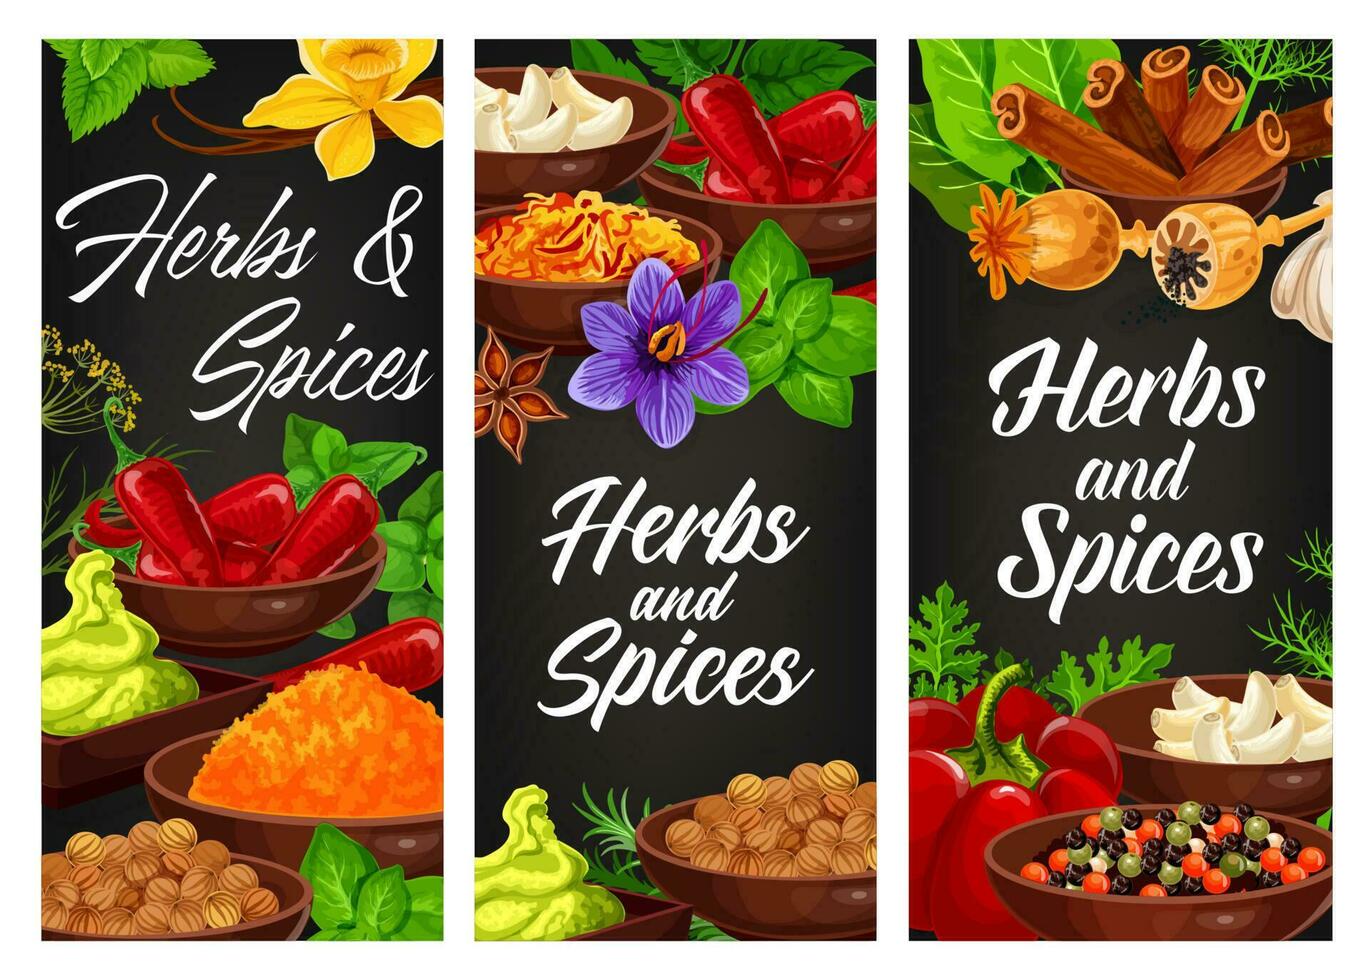 Herbs, spices seasonings and condiments banners vector